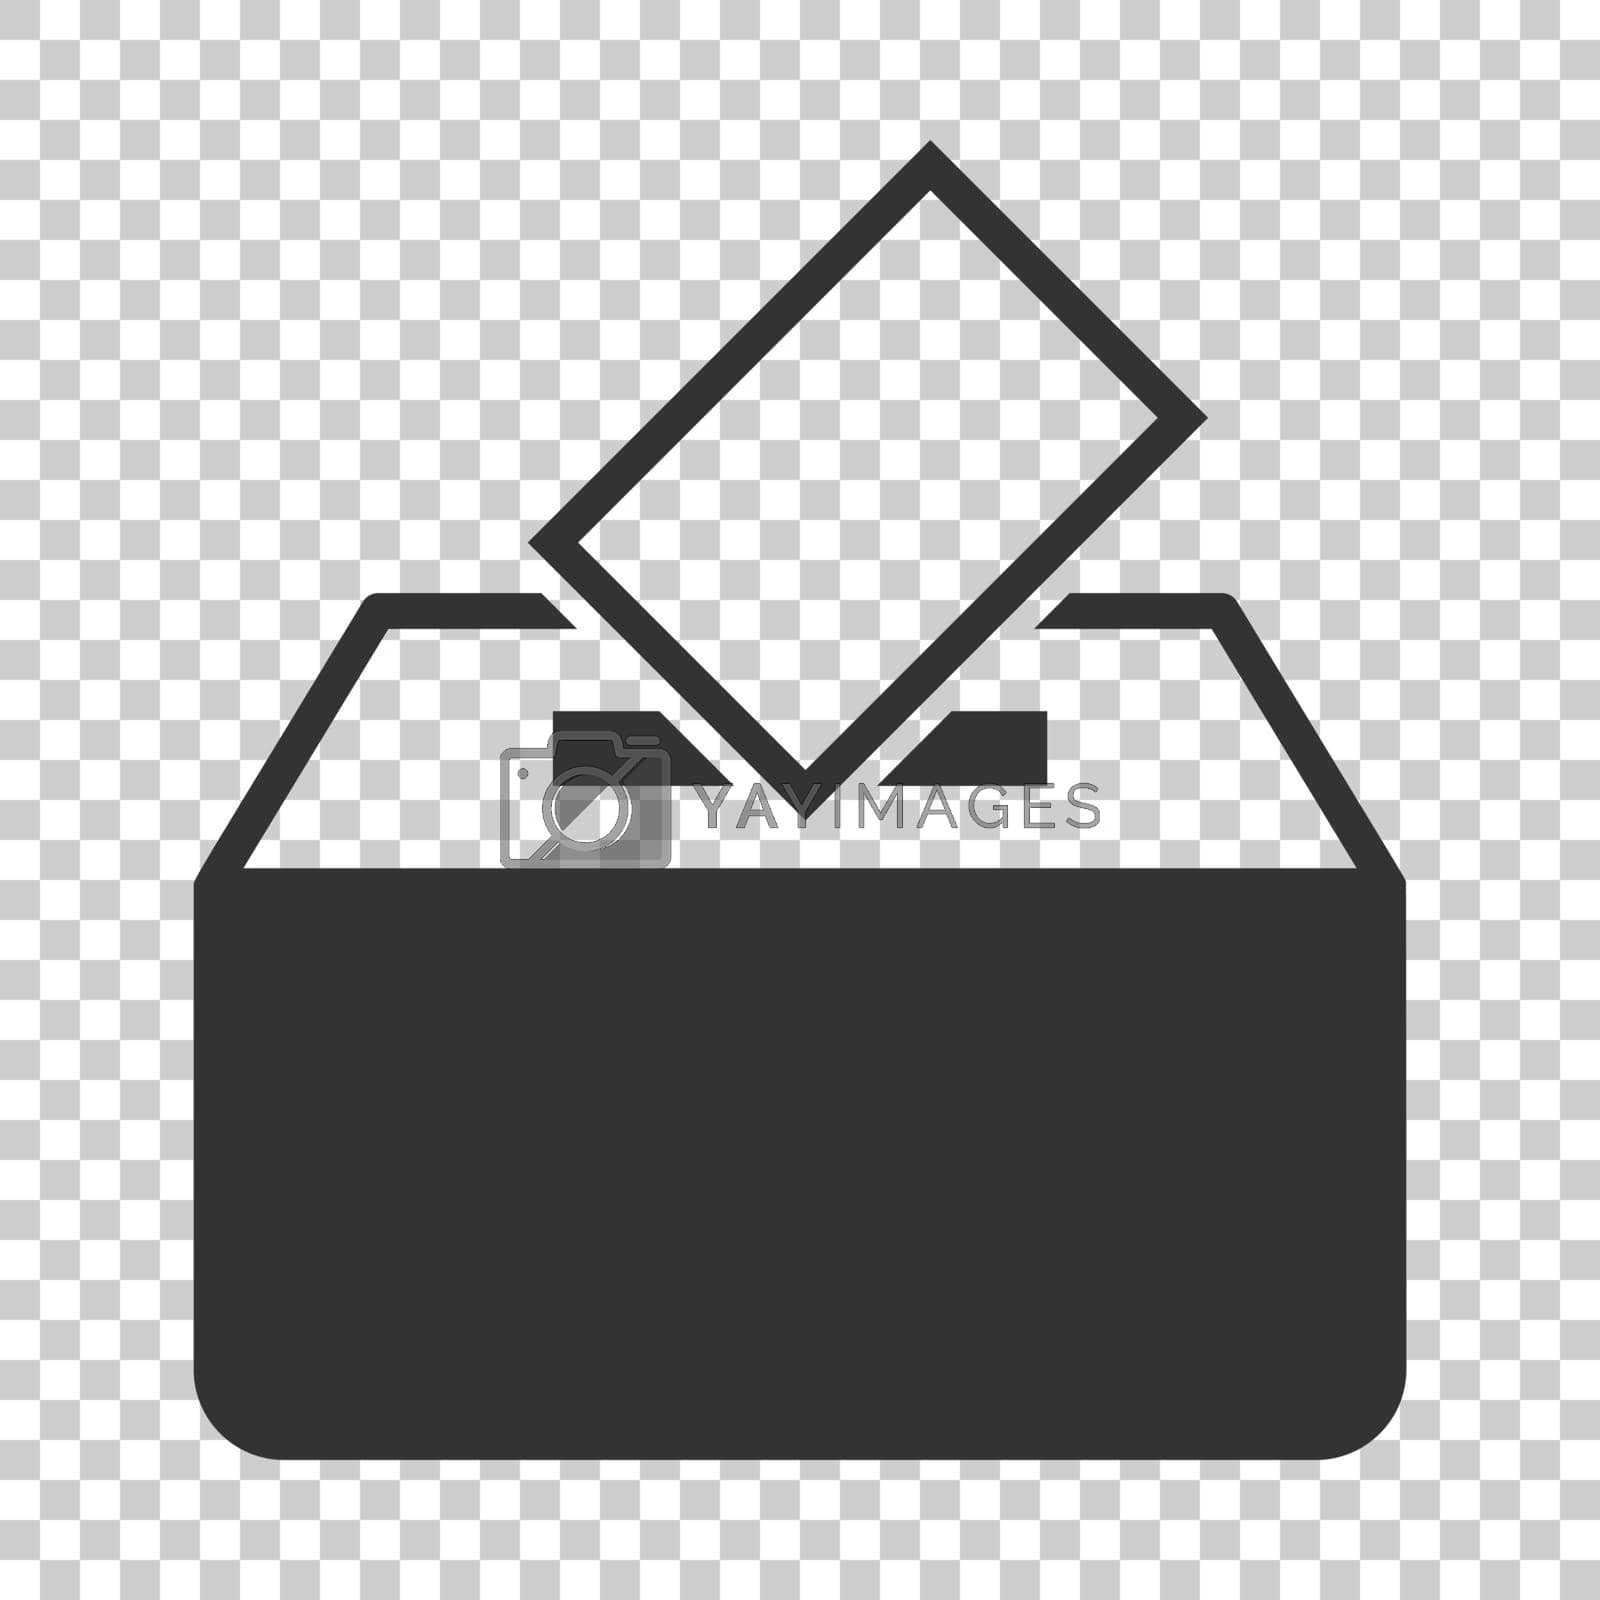 Royalty free image of Election voter box icon in flat style. Ballot suggestion vector illustration on isolated background. Election vote business concept. by LysenkoA